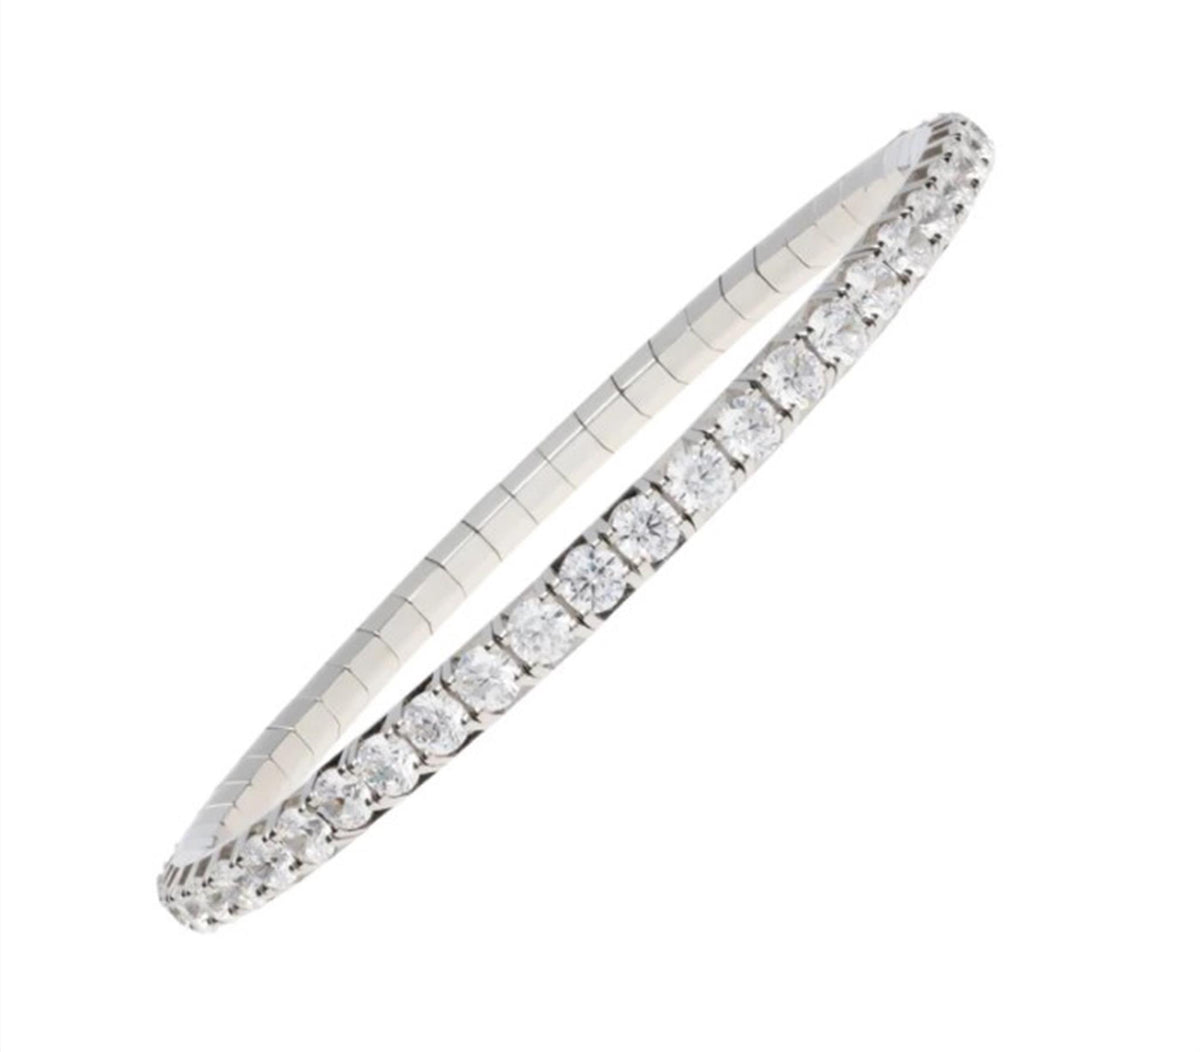 18Kt White Gold Extensible Bracelet With 7.30cttw Natural Diamonds